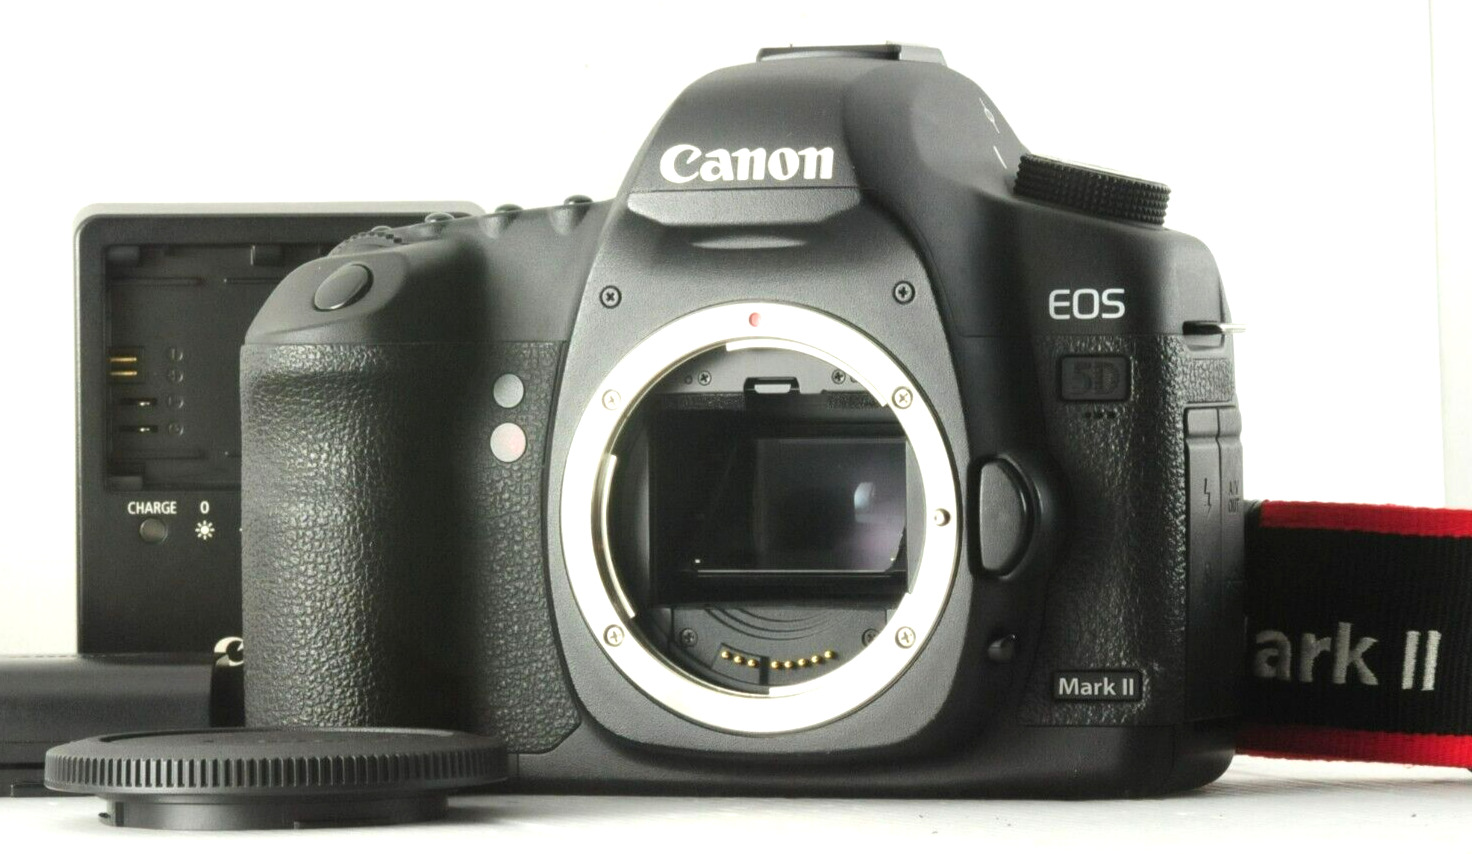 Near MINT Canon EOS 5D Mark II 21.1 MP Digital SLR Camera w/charger From Japan